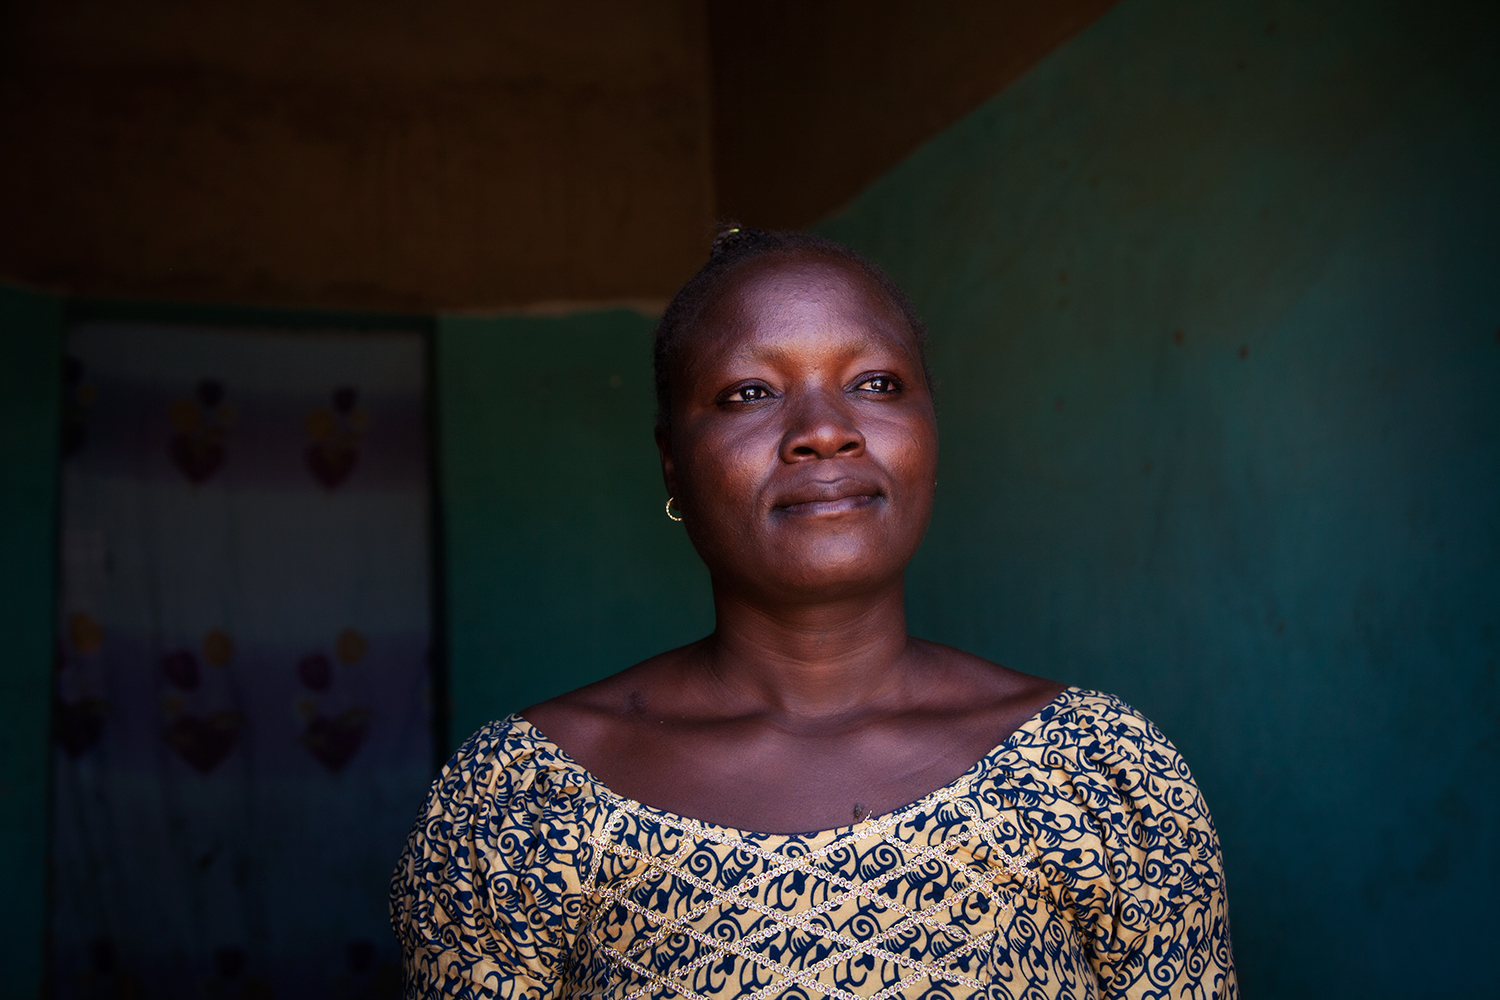 Awa Ouédraogo photographed by Leila Alaoui in Ouagadougou, Burkina Faso, on 13 January 2016, as part of the My Body My Rights campaign. Awa Ouédraogo is fruit seller in Ouagadougou and a former resident of the Pan Bila shelter for survivors of forced marriage, rape and unwanted pregnancy in Ouagadougou. When she fell pregnant at age 14, she was rejected by her family, lived in the street and gave birth to her child one evening in a shop where she took refuge. Awa spent a few years at Pan Bila with her child and is now independent and able to provide for herself and her child thanks to her fruit stall.